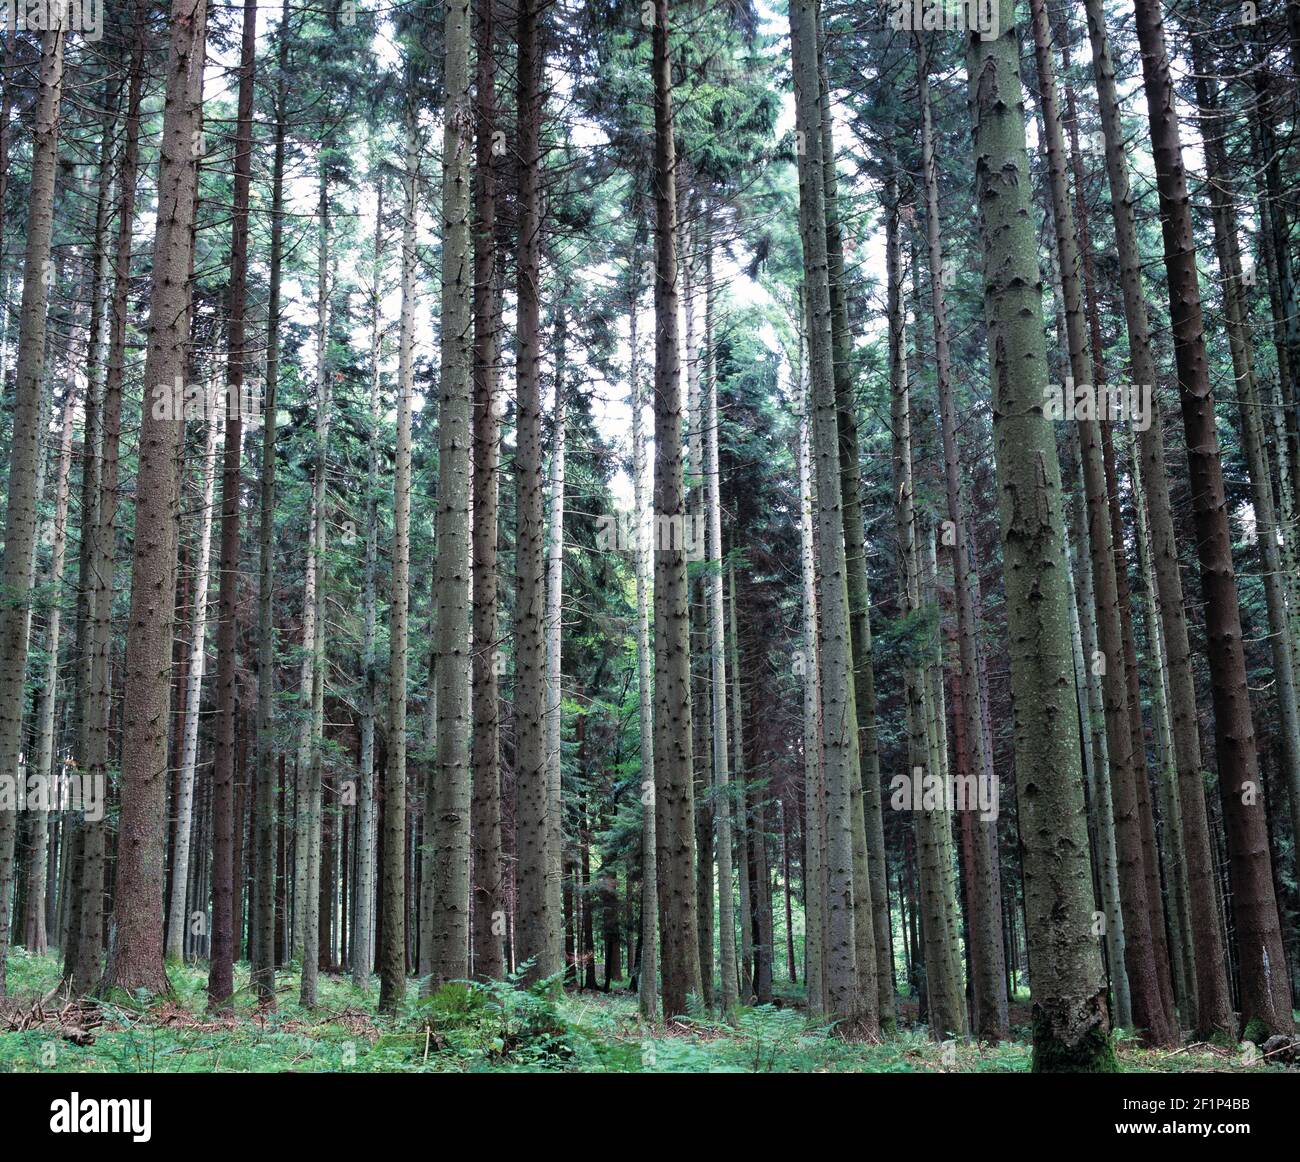 Germany. Baden-Württemberg. Black Forest. Tall Pine trees. Stock Photo